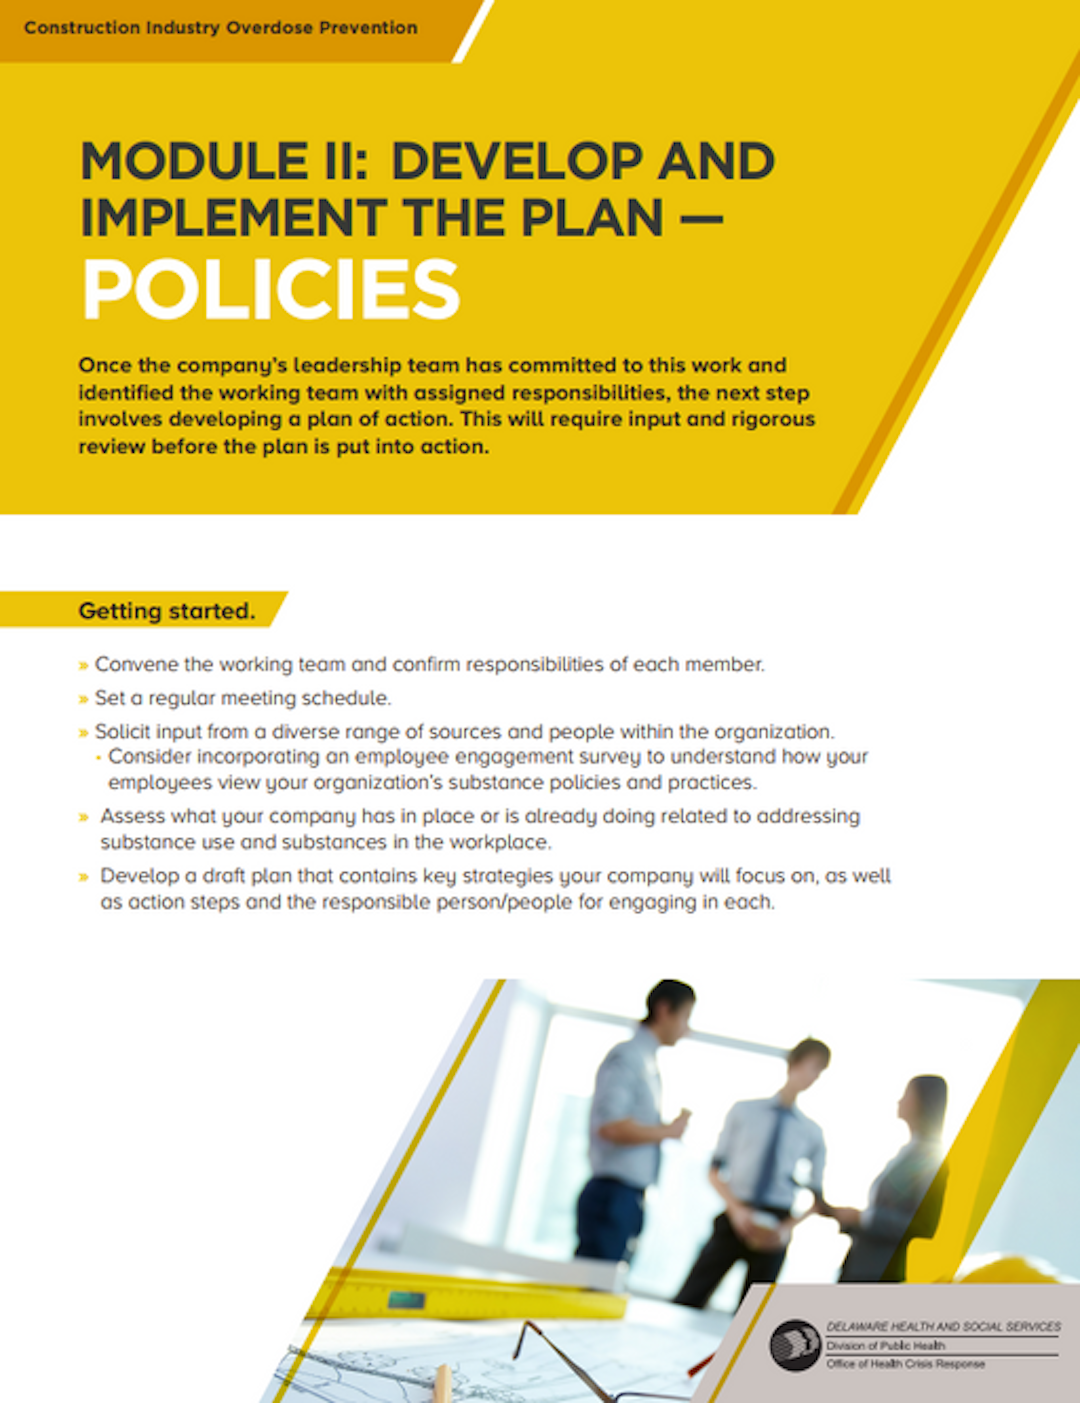 Module II: Develop and Implement the Plan — Policies